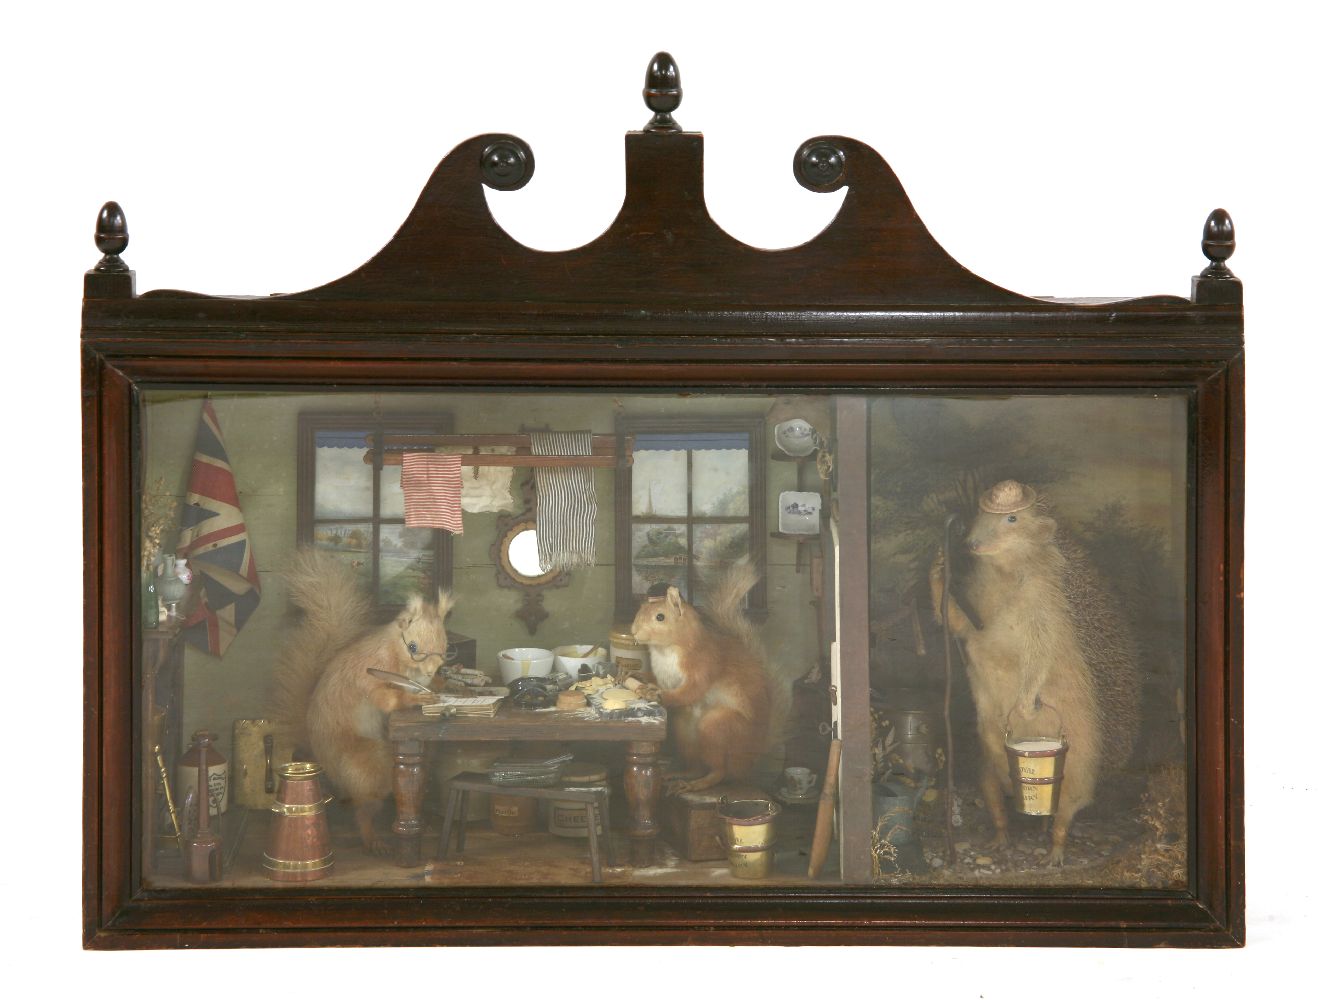 ROYAL ACORN DAIRY,late Victorian, an impressive and highly detailed taxidermy diorama, with two